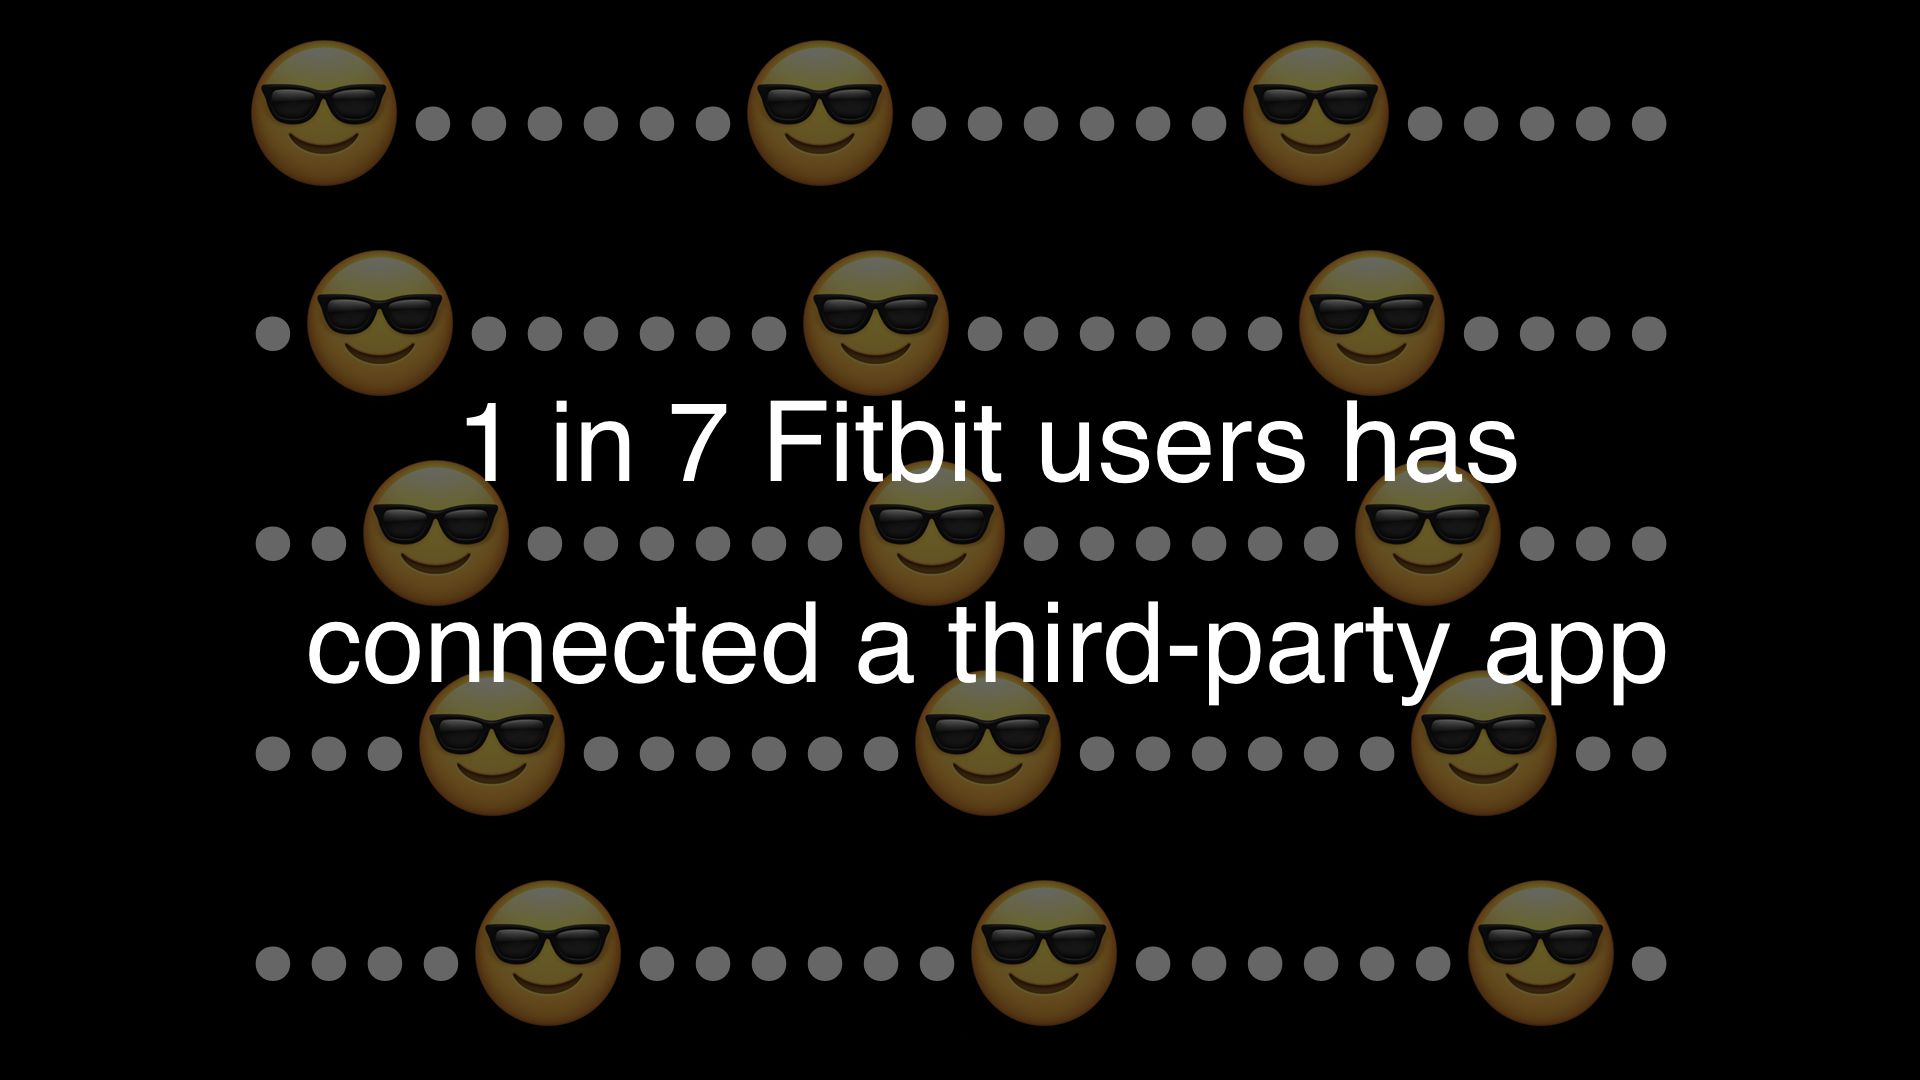 Text: 1 in 7 Fitbit users has connected a third-party app.